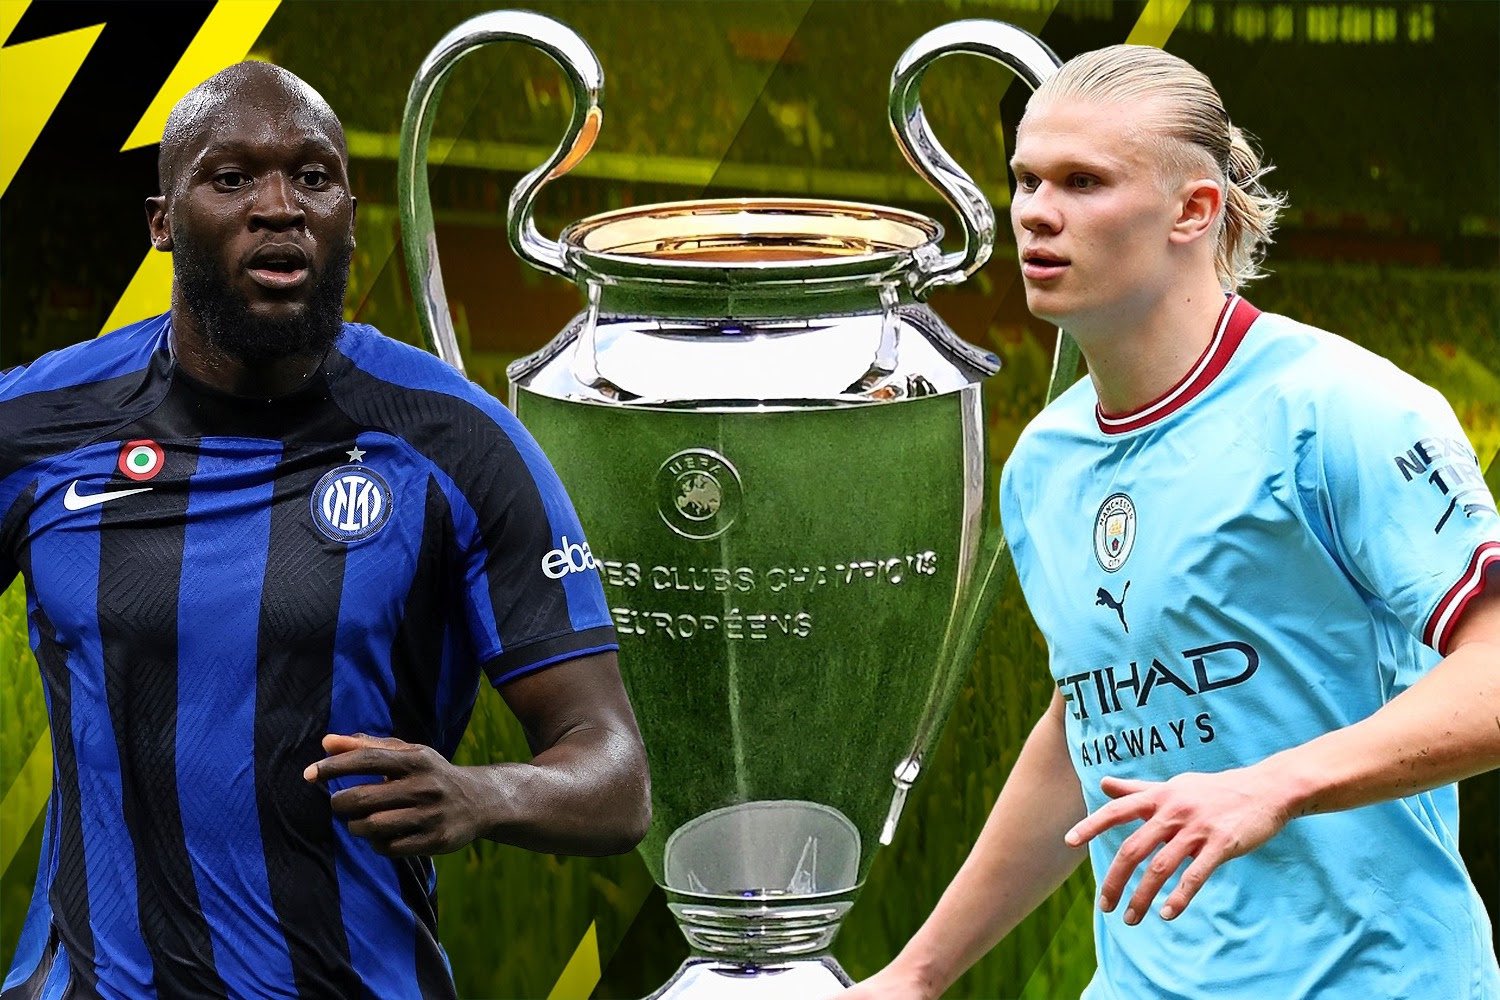 City aiming for the first ever UCL crown as Inter seeks to break over 10-year drought